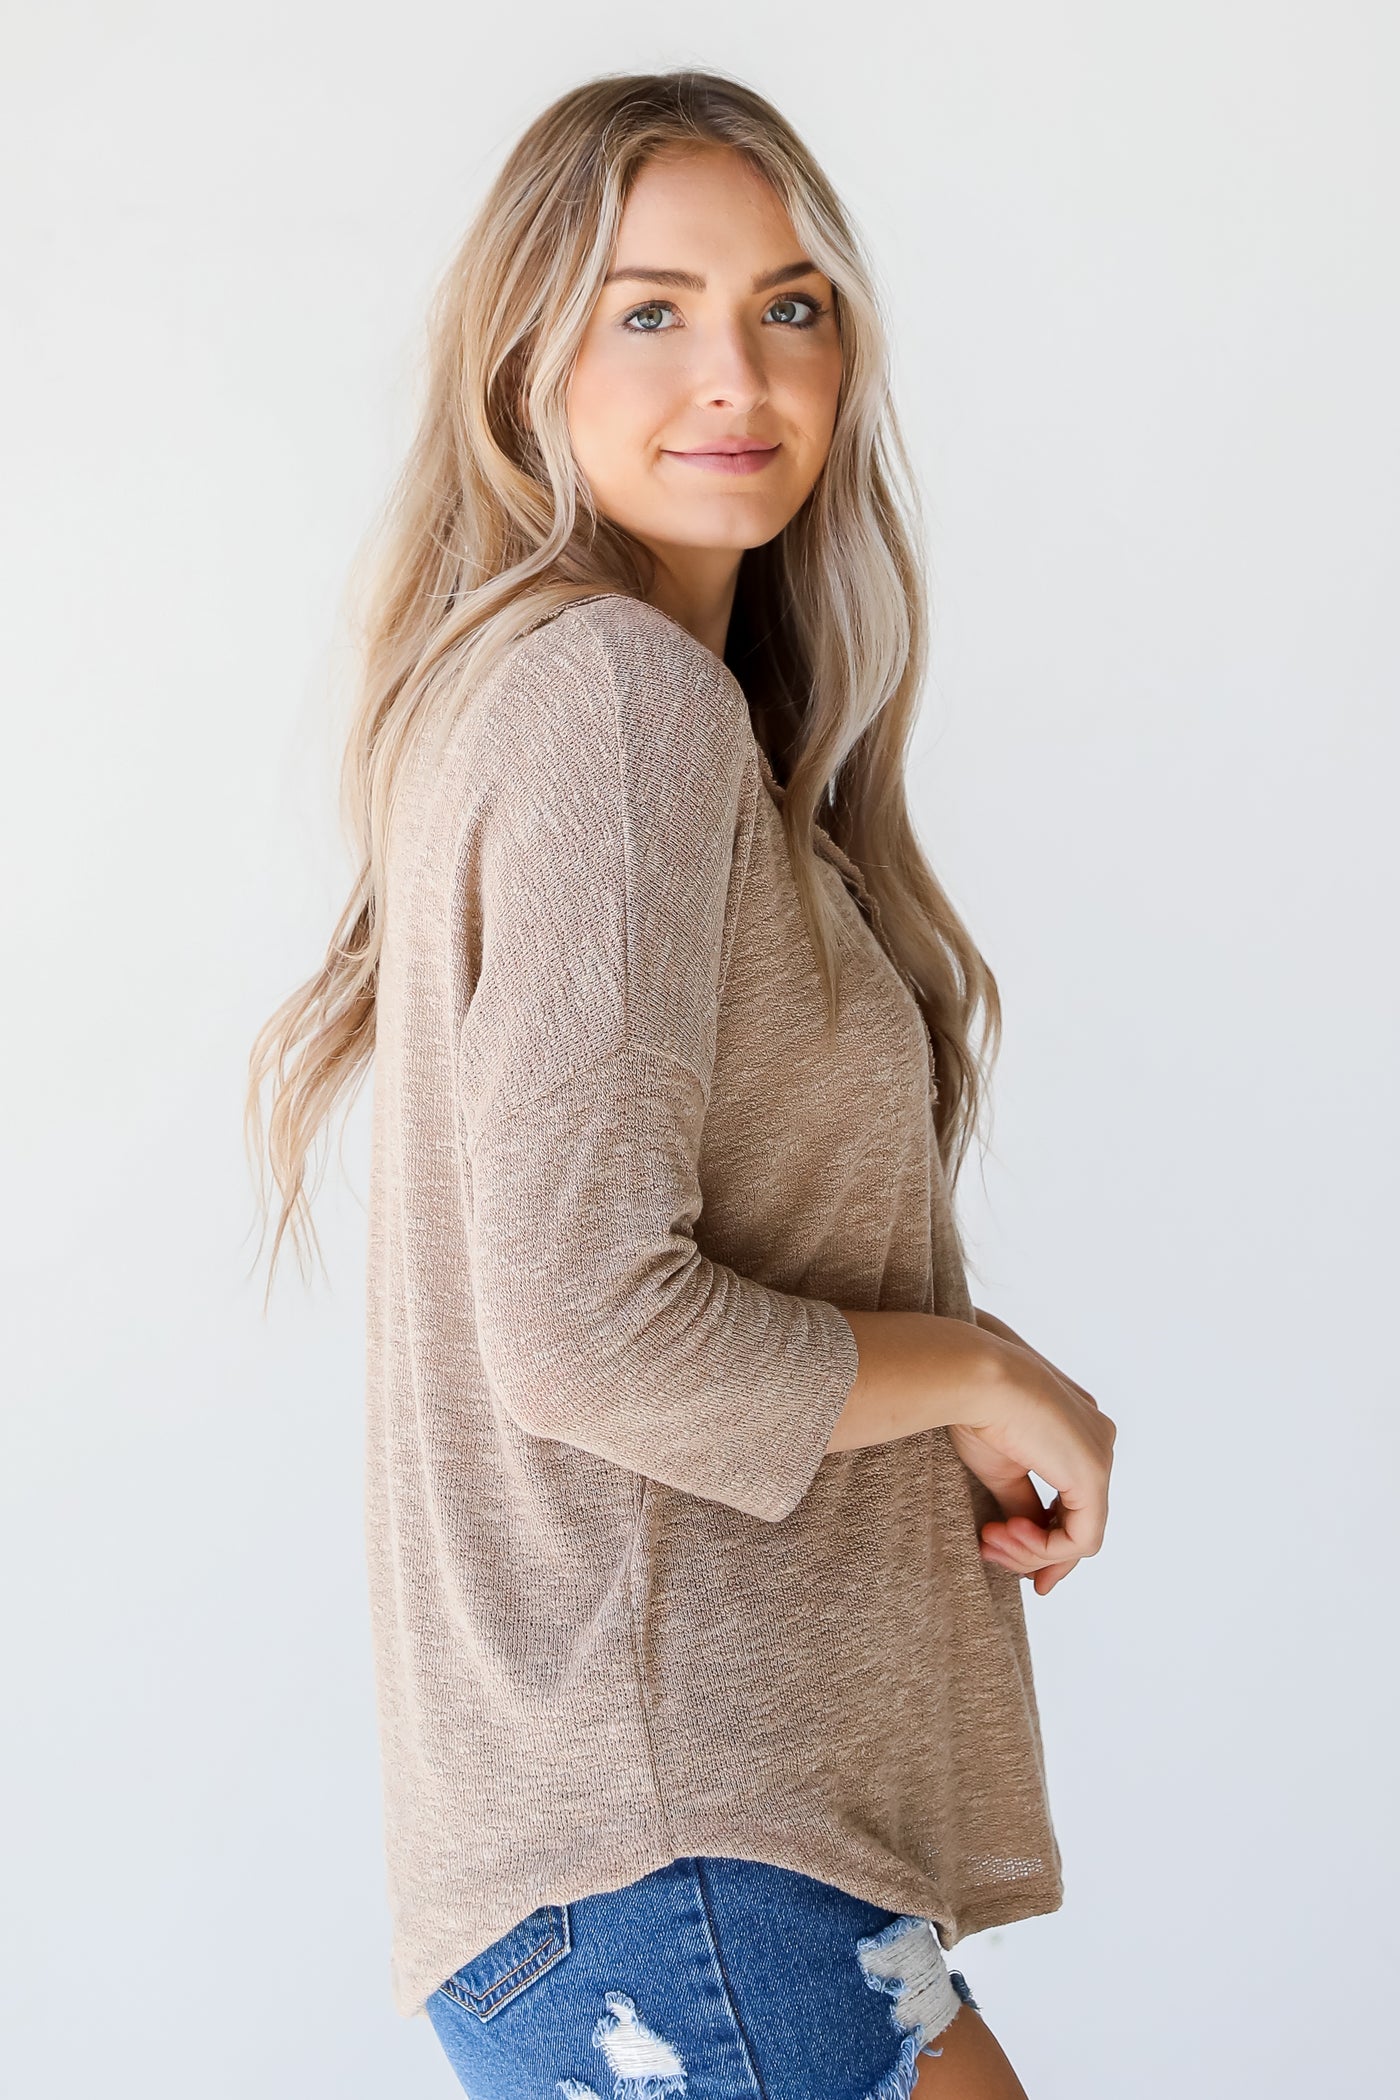 Henley Knit Top side view